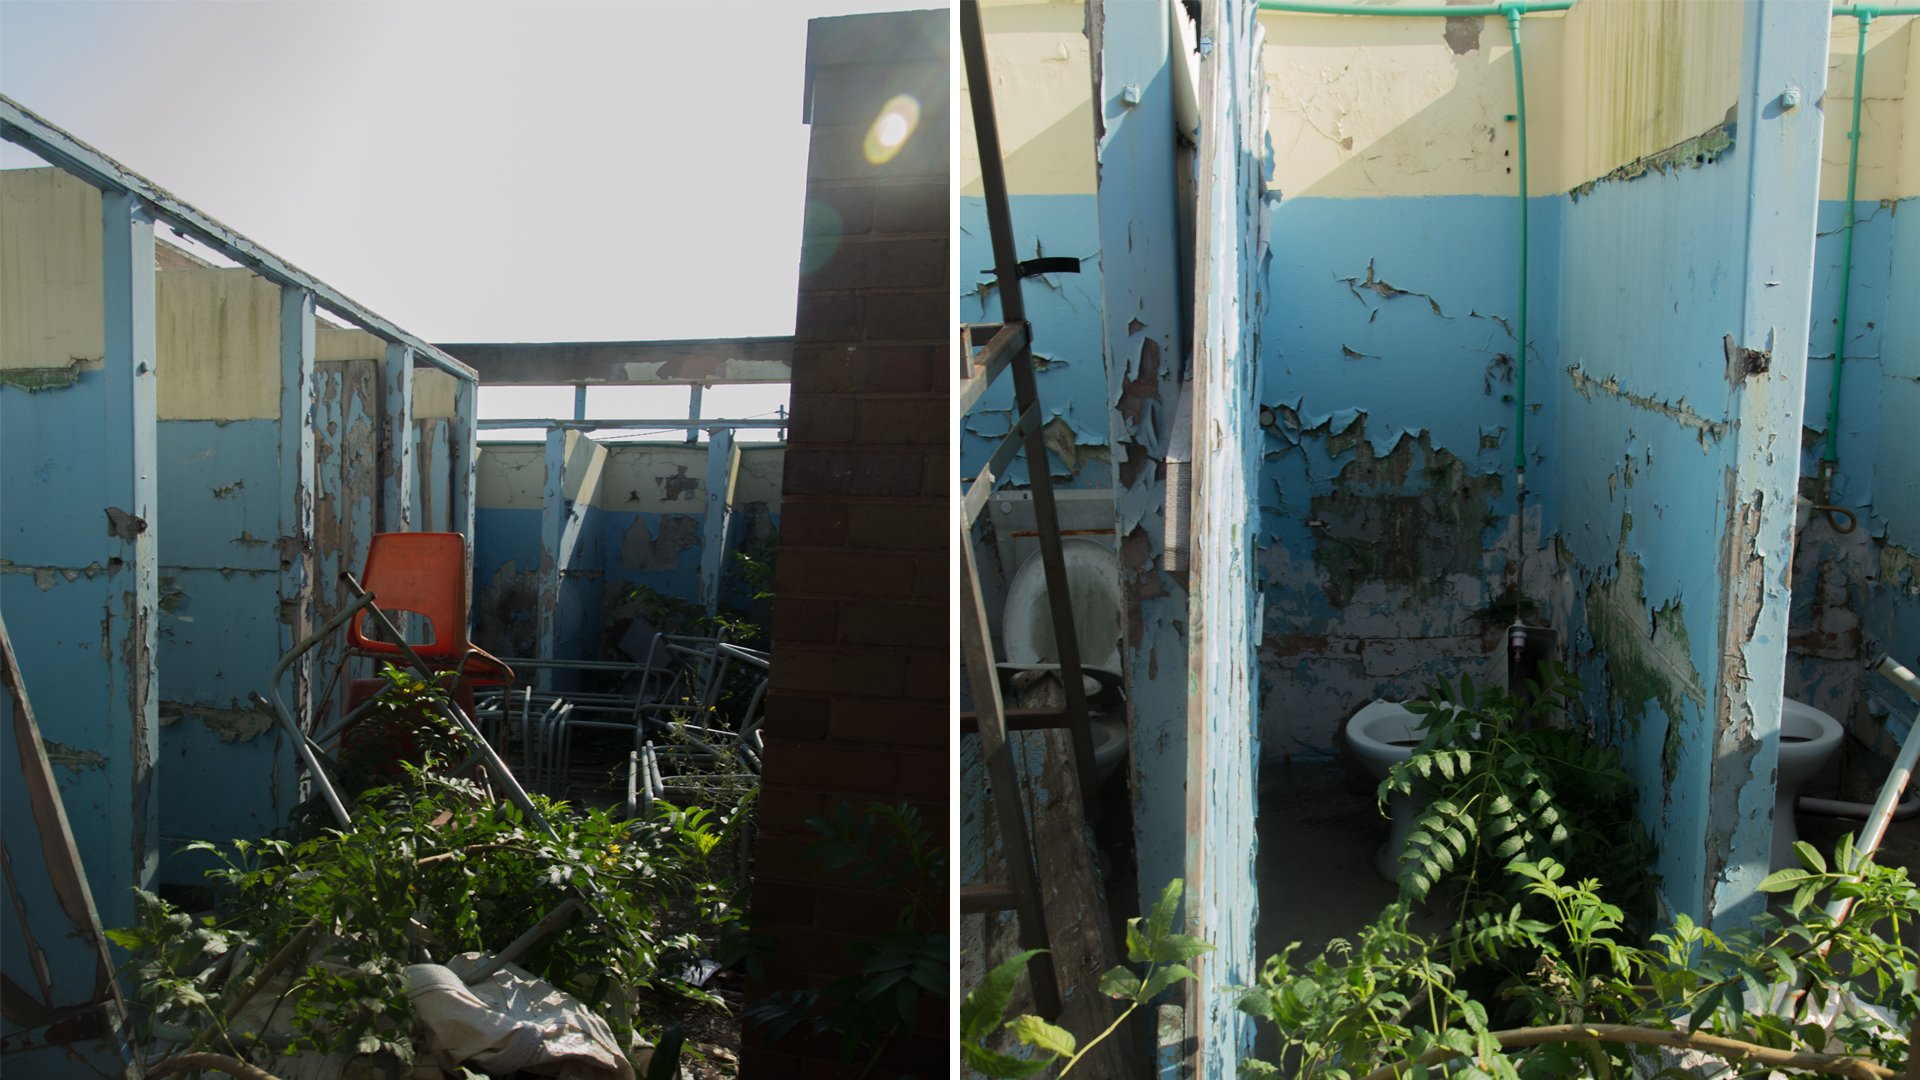 A view of the girls' toilet block that has been severely damaged.